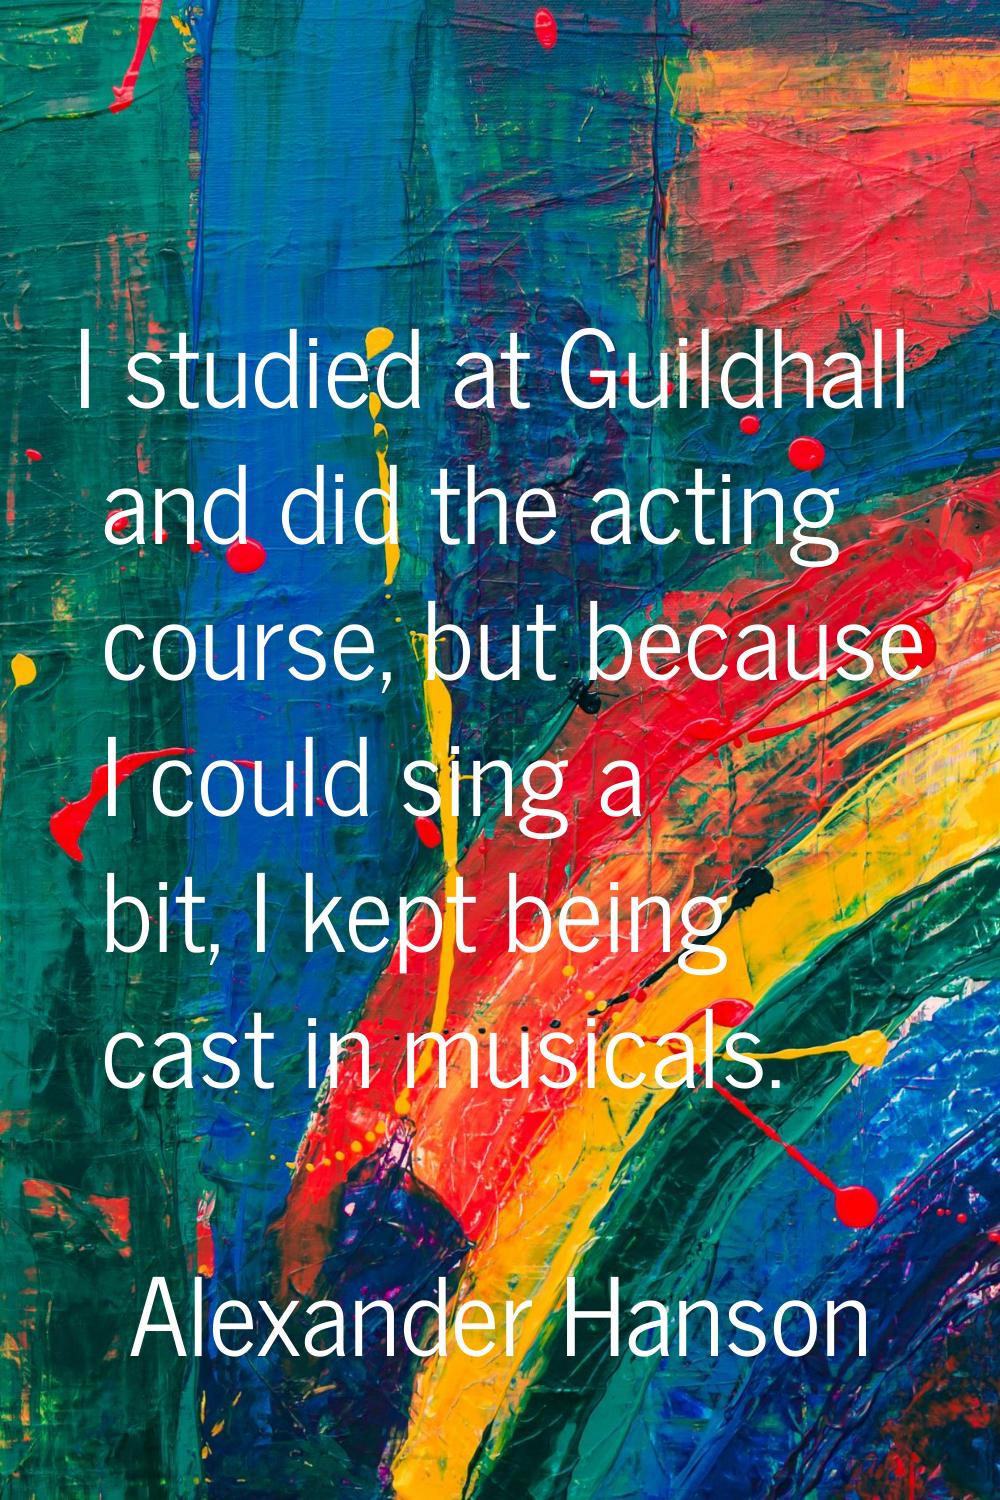 I studied at Guildhall and did the acting course, but because I could sing a bit, I kept being cast